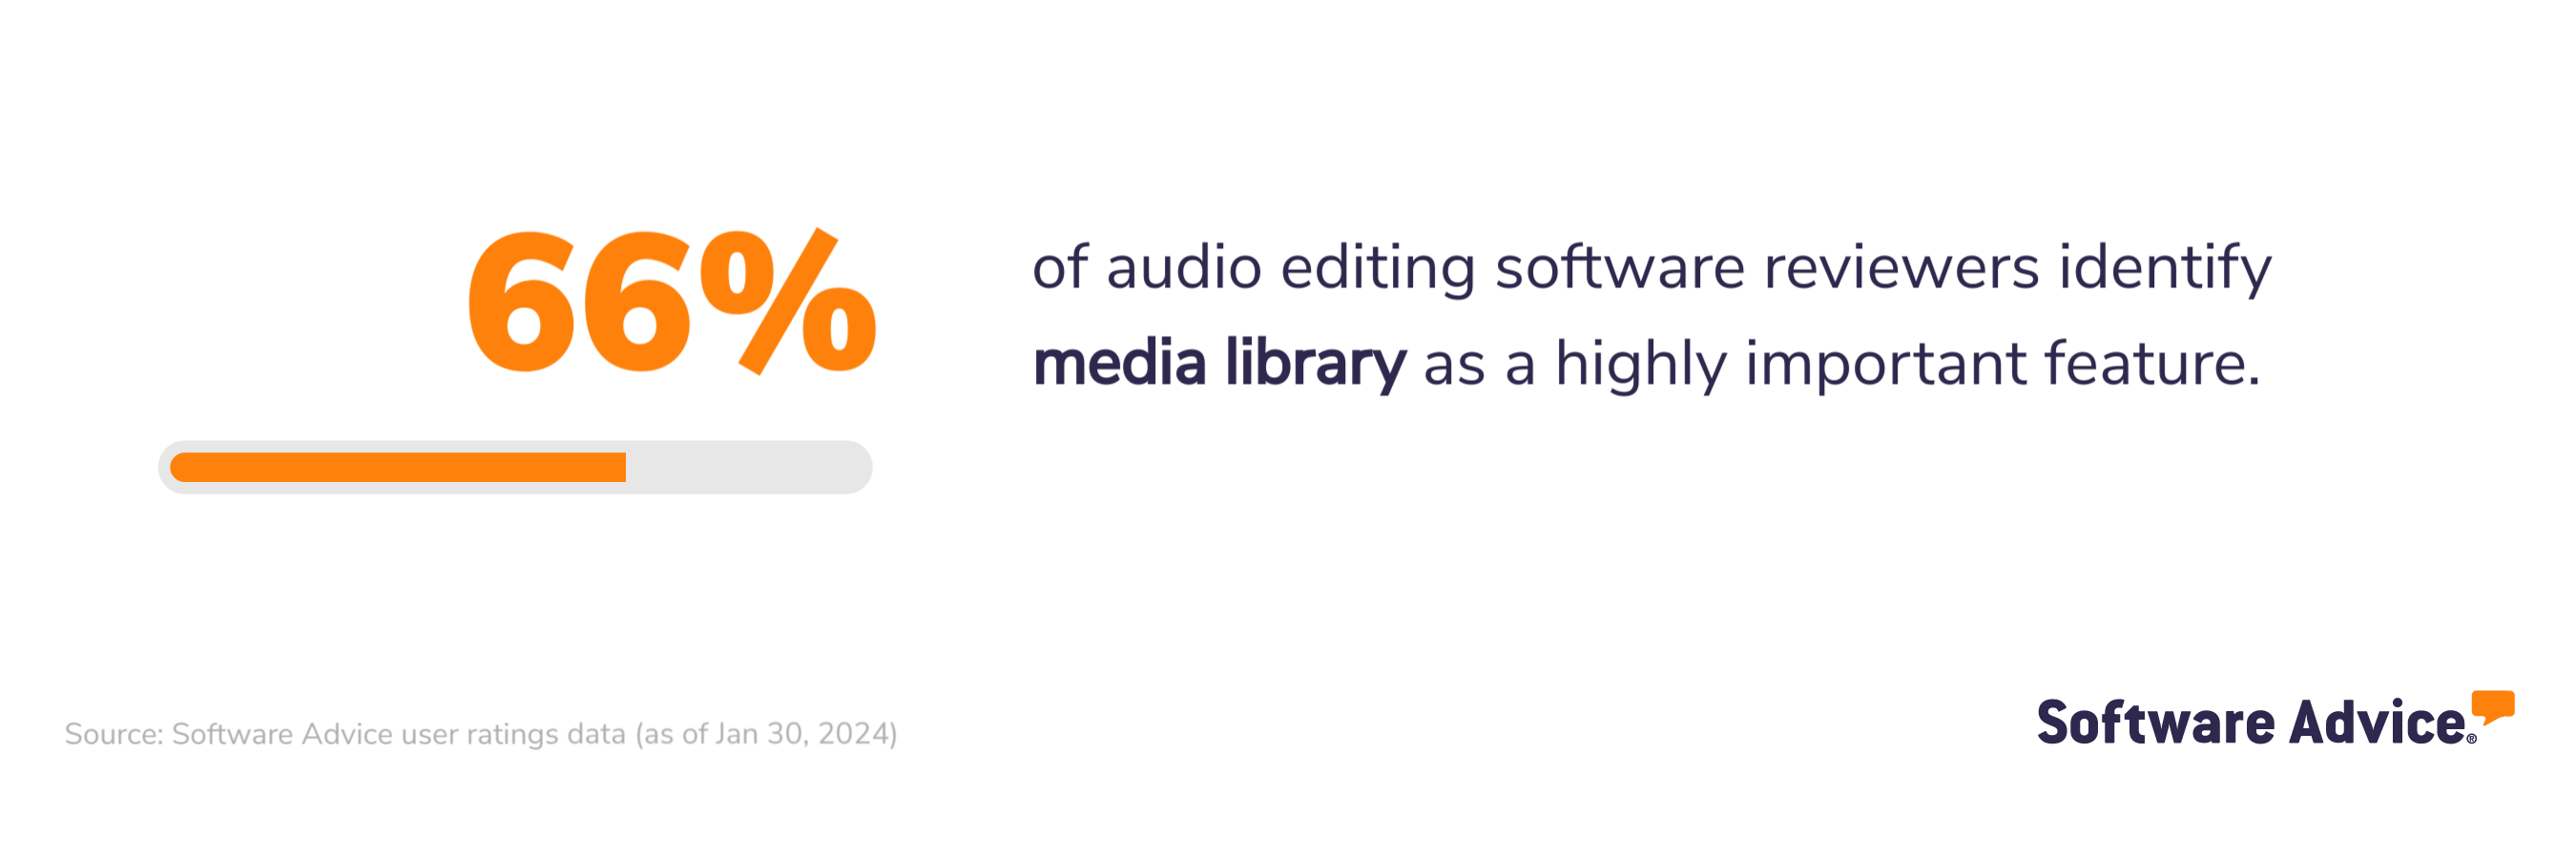 Software Advice graphic: 66% of audio editing software reviewers identify media library as a highly important feature